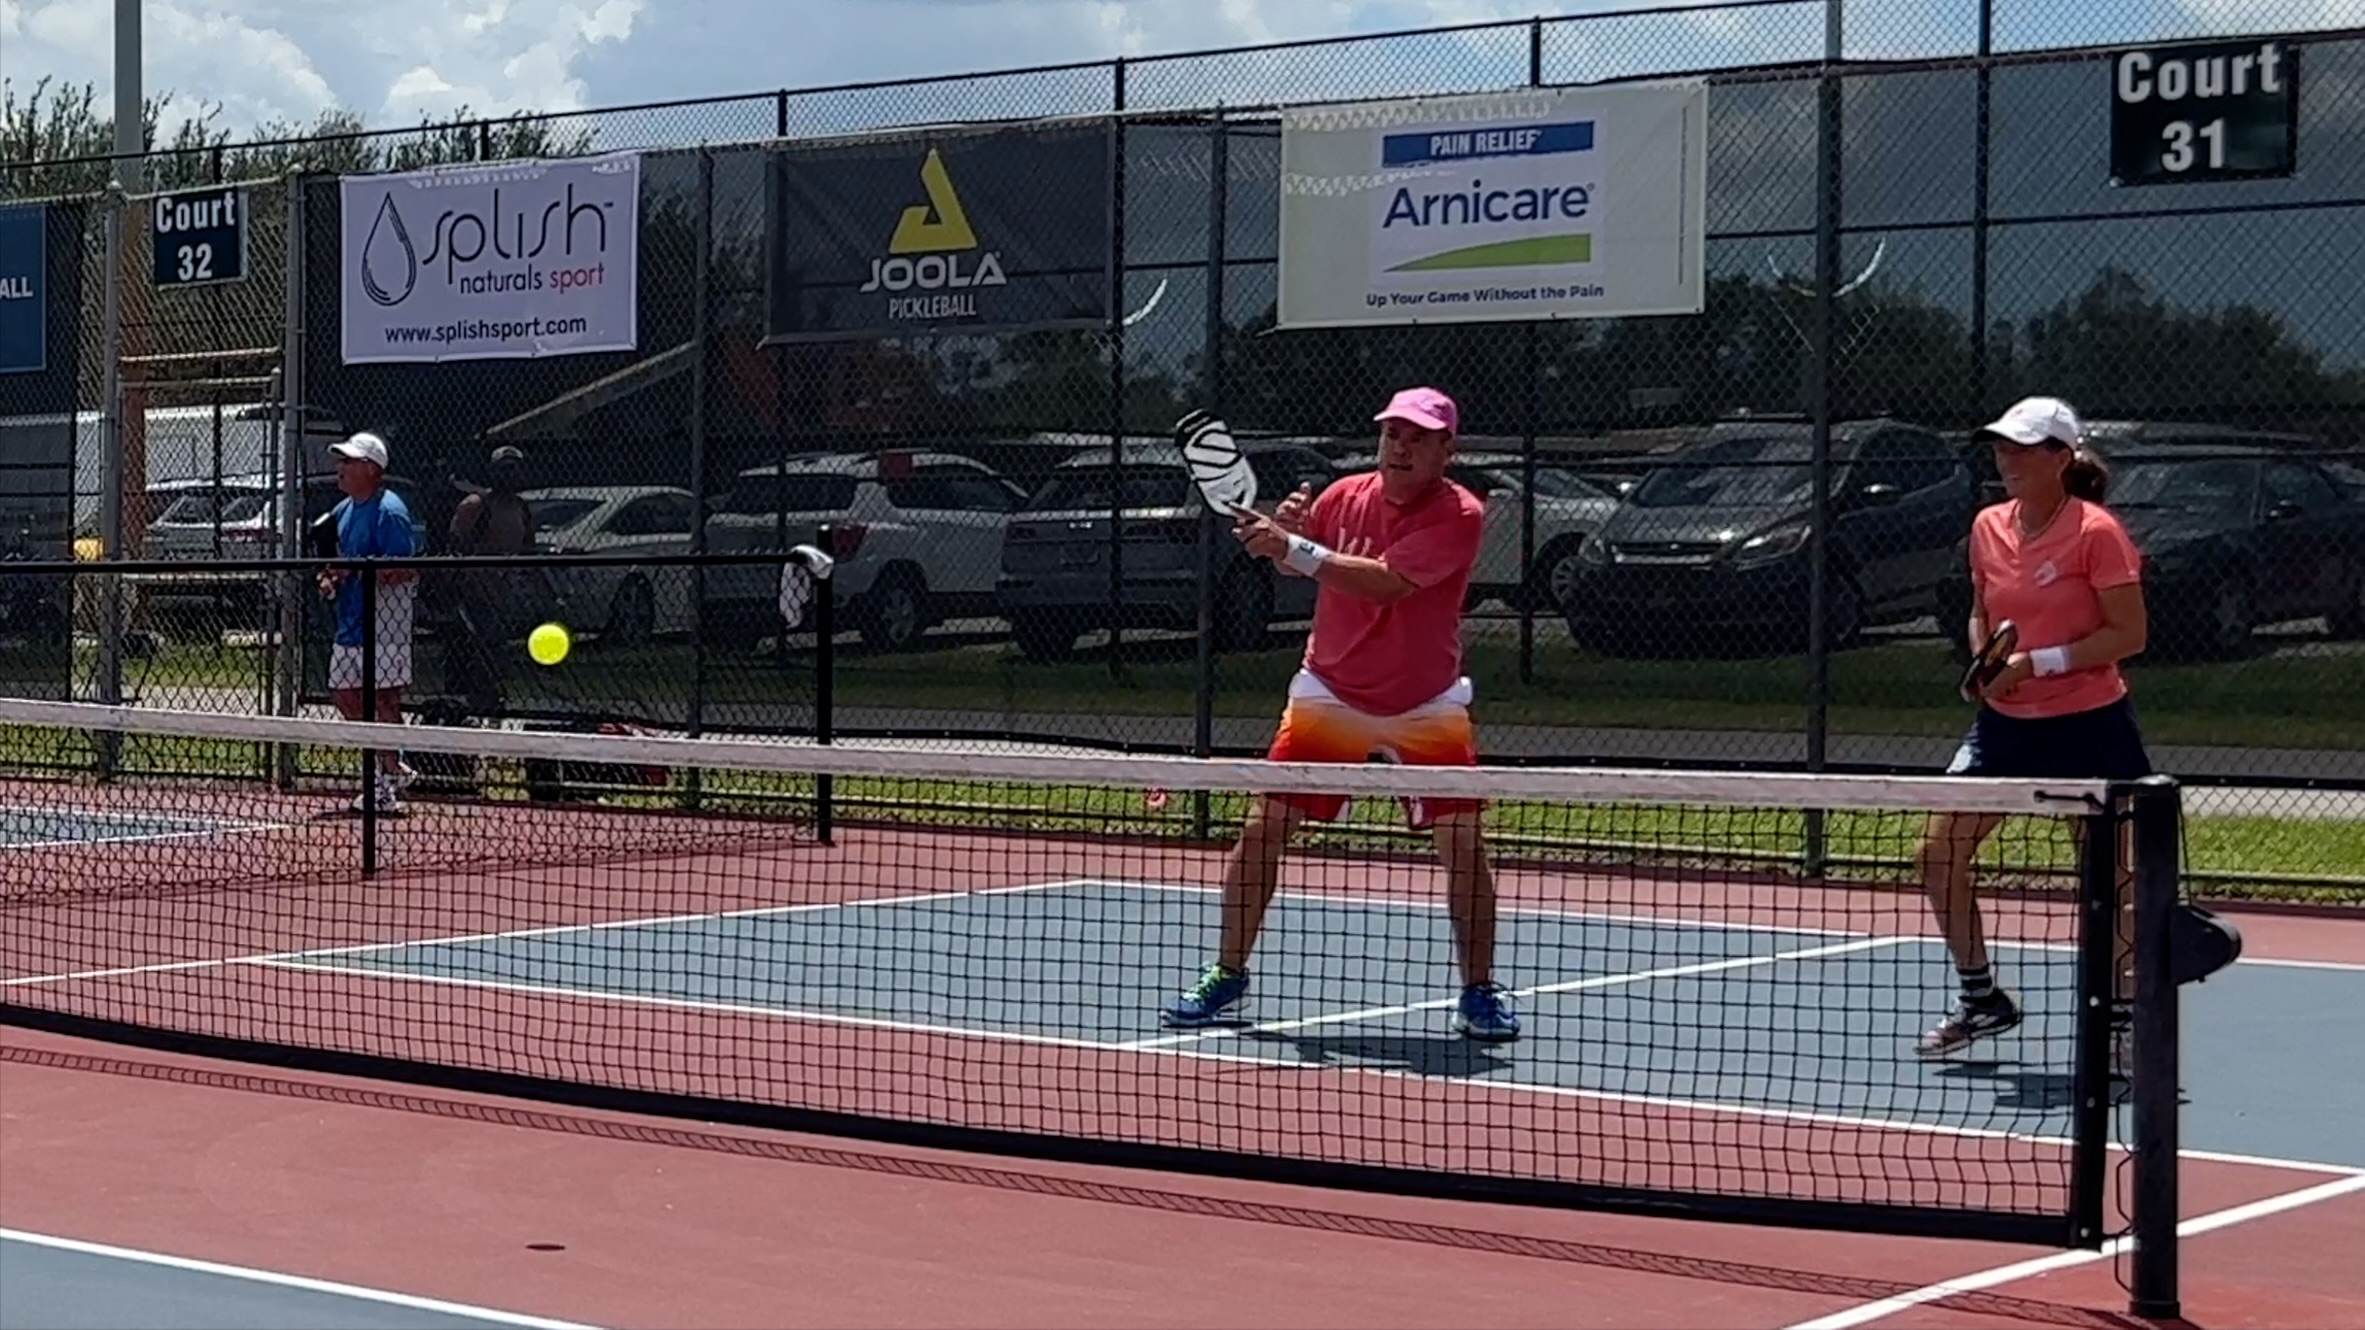 Tony Roig at the non volley zone in a mixed doubles match at the US Open Naples FL